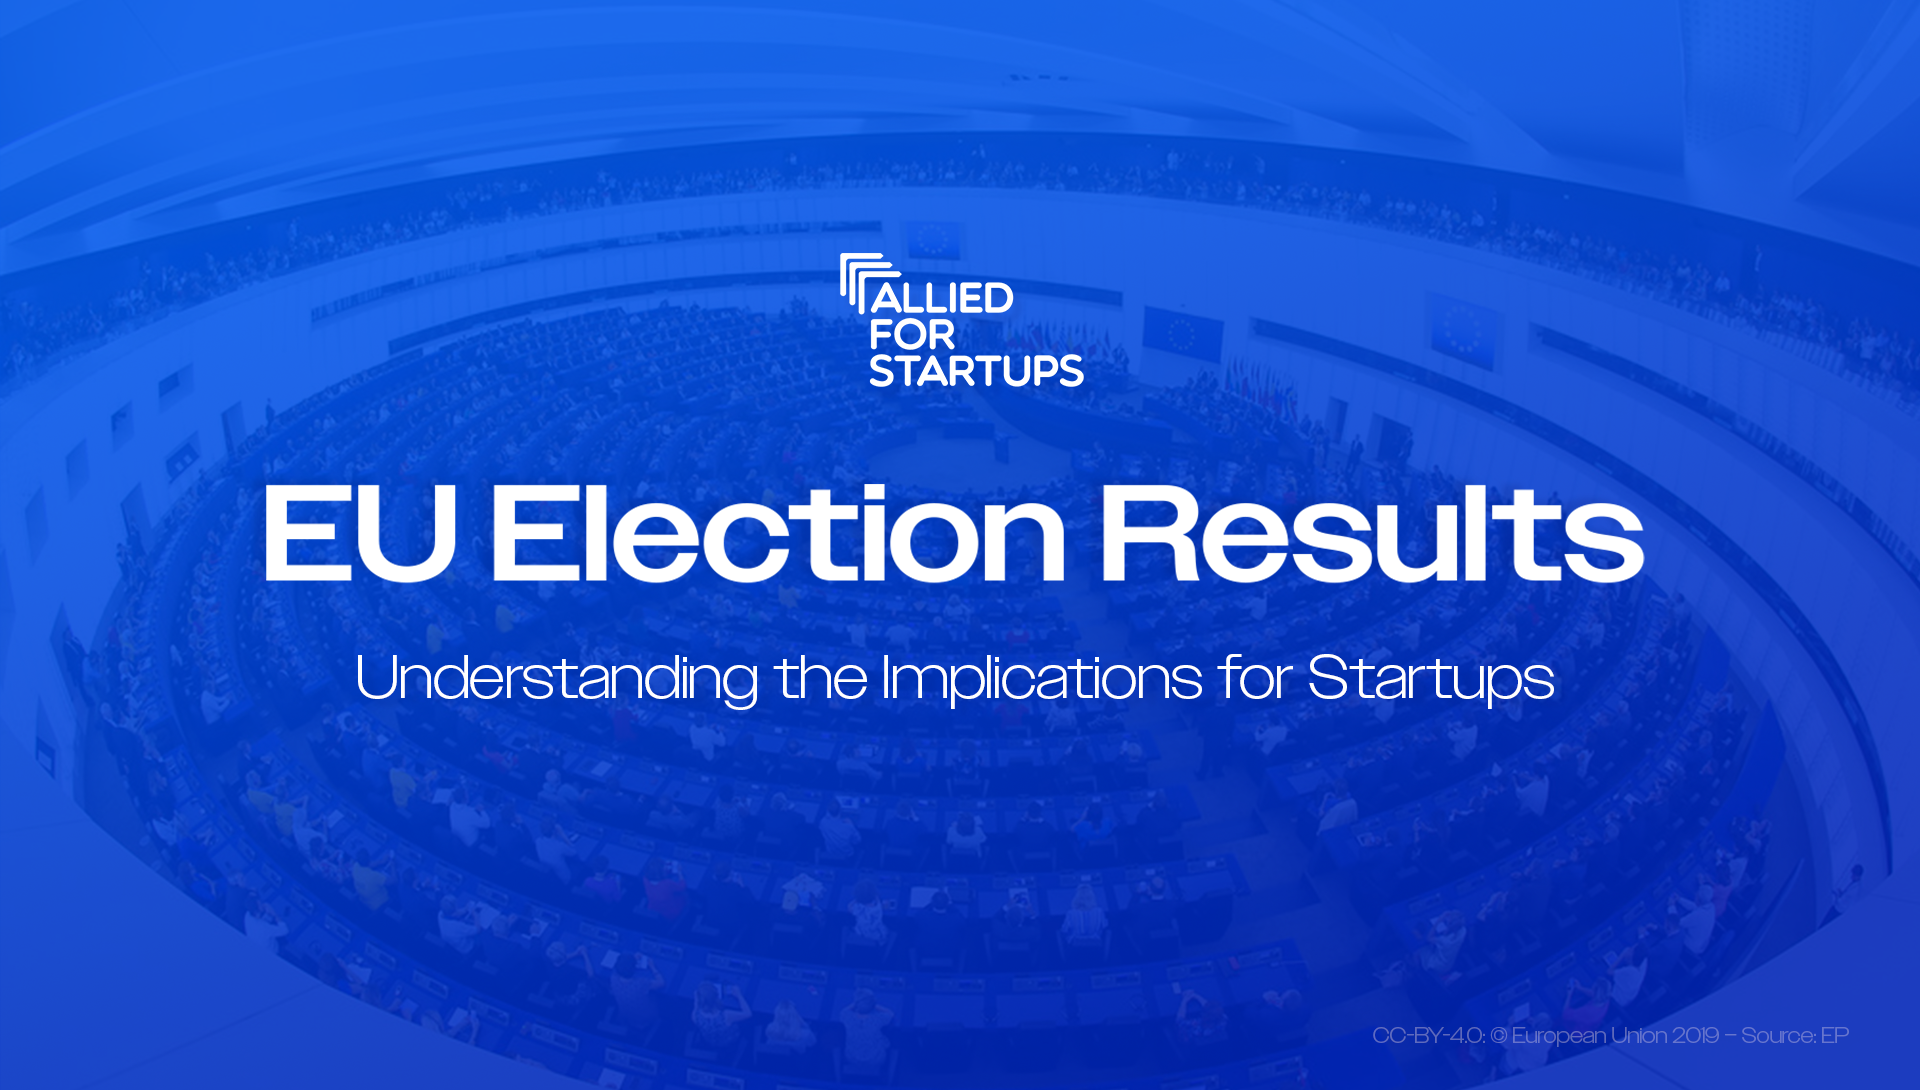 EU Election Results and Their Implications for Startups